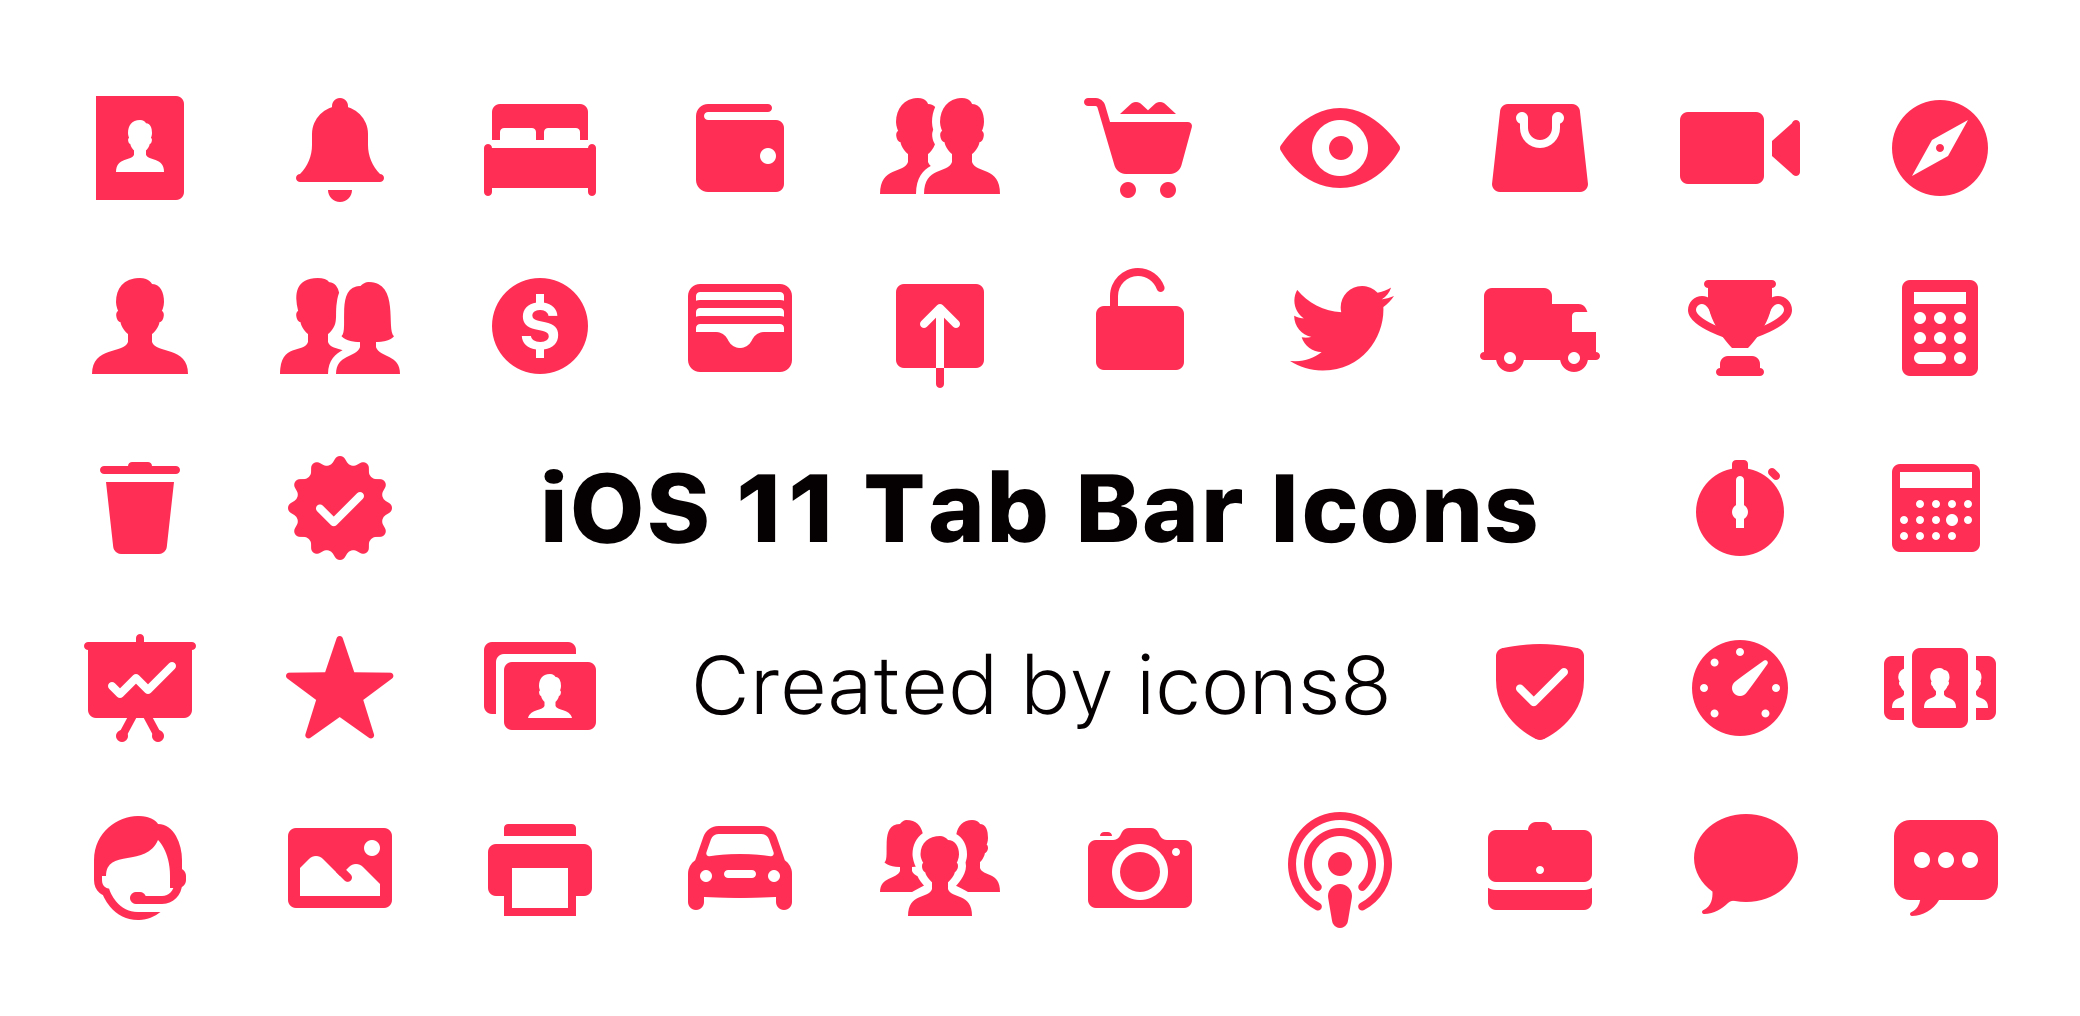 iOS7 Icon Pack by Michael Shanks - Dribbble